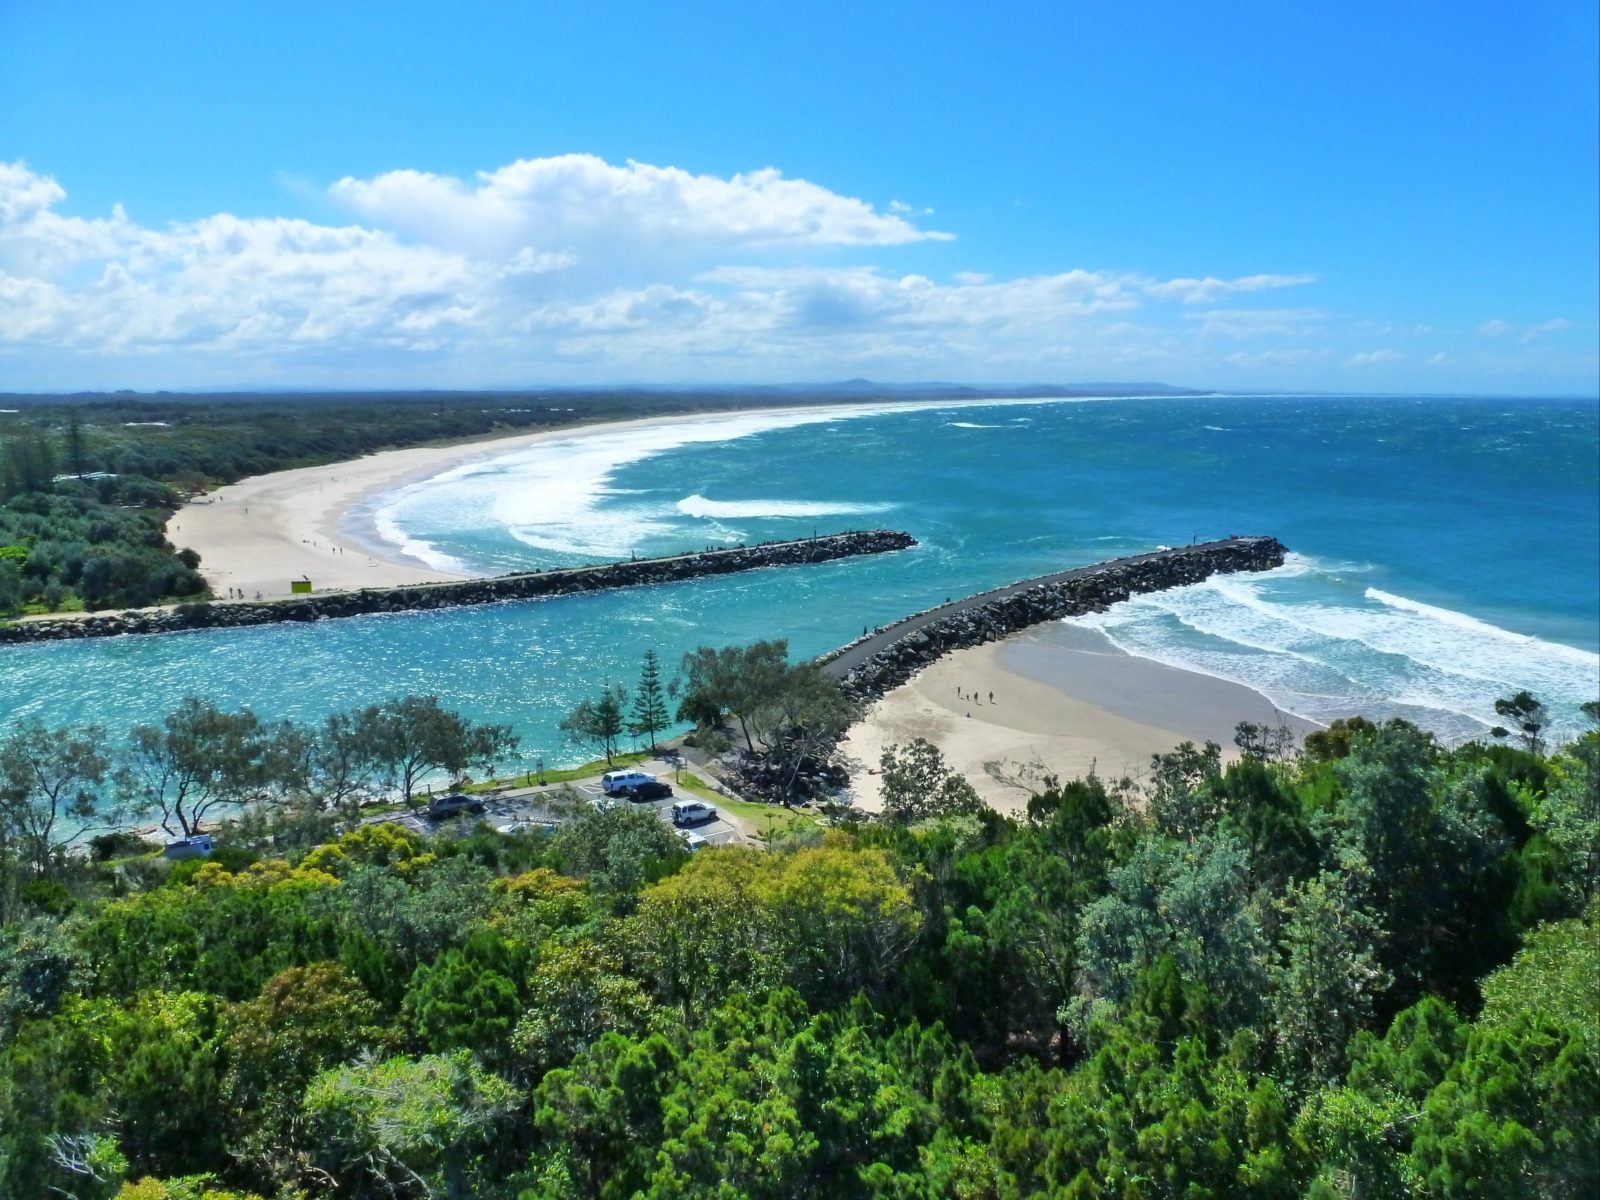 Razorback Lookout overlooking Shark Bay and Evans River mouth